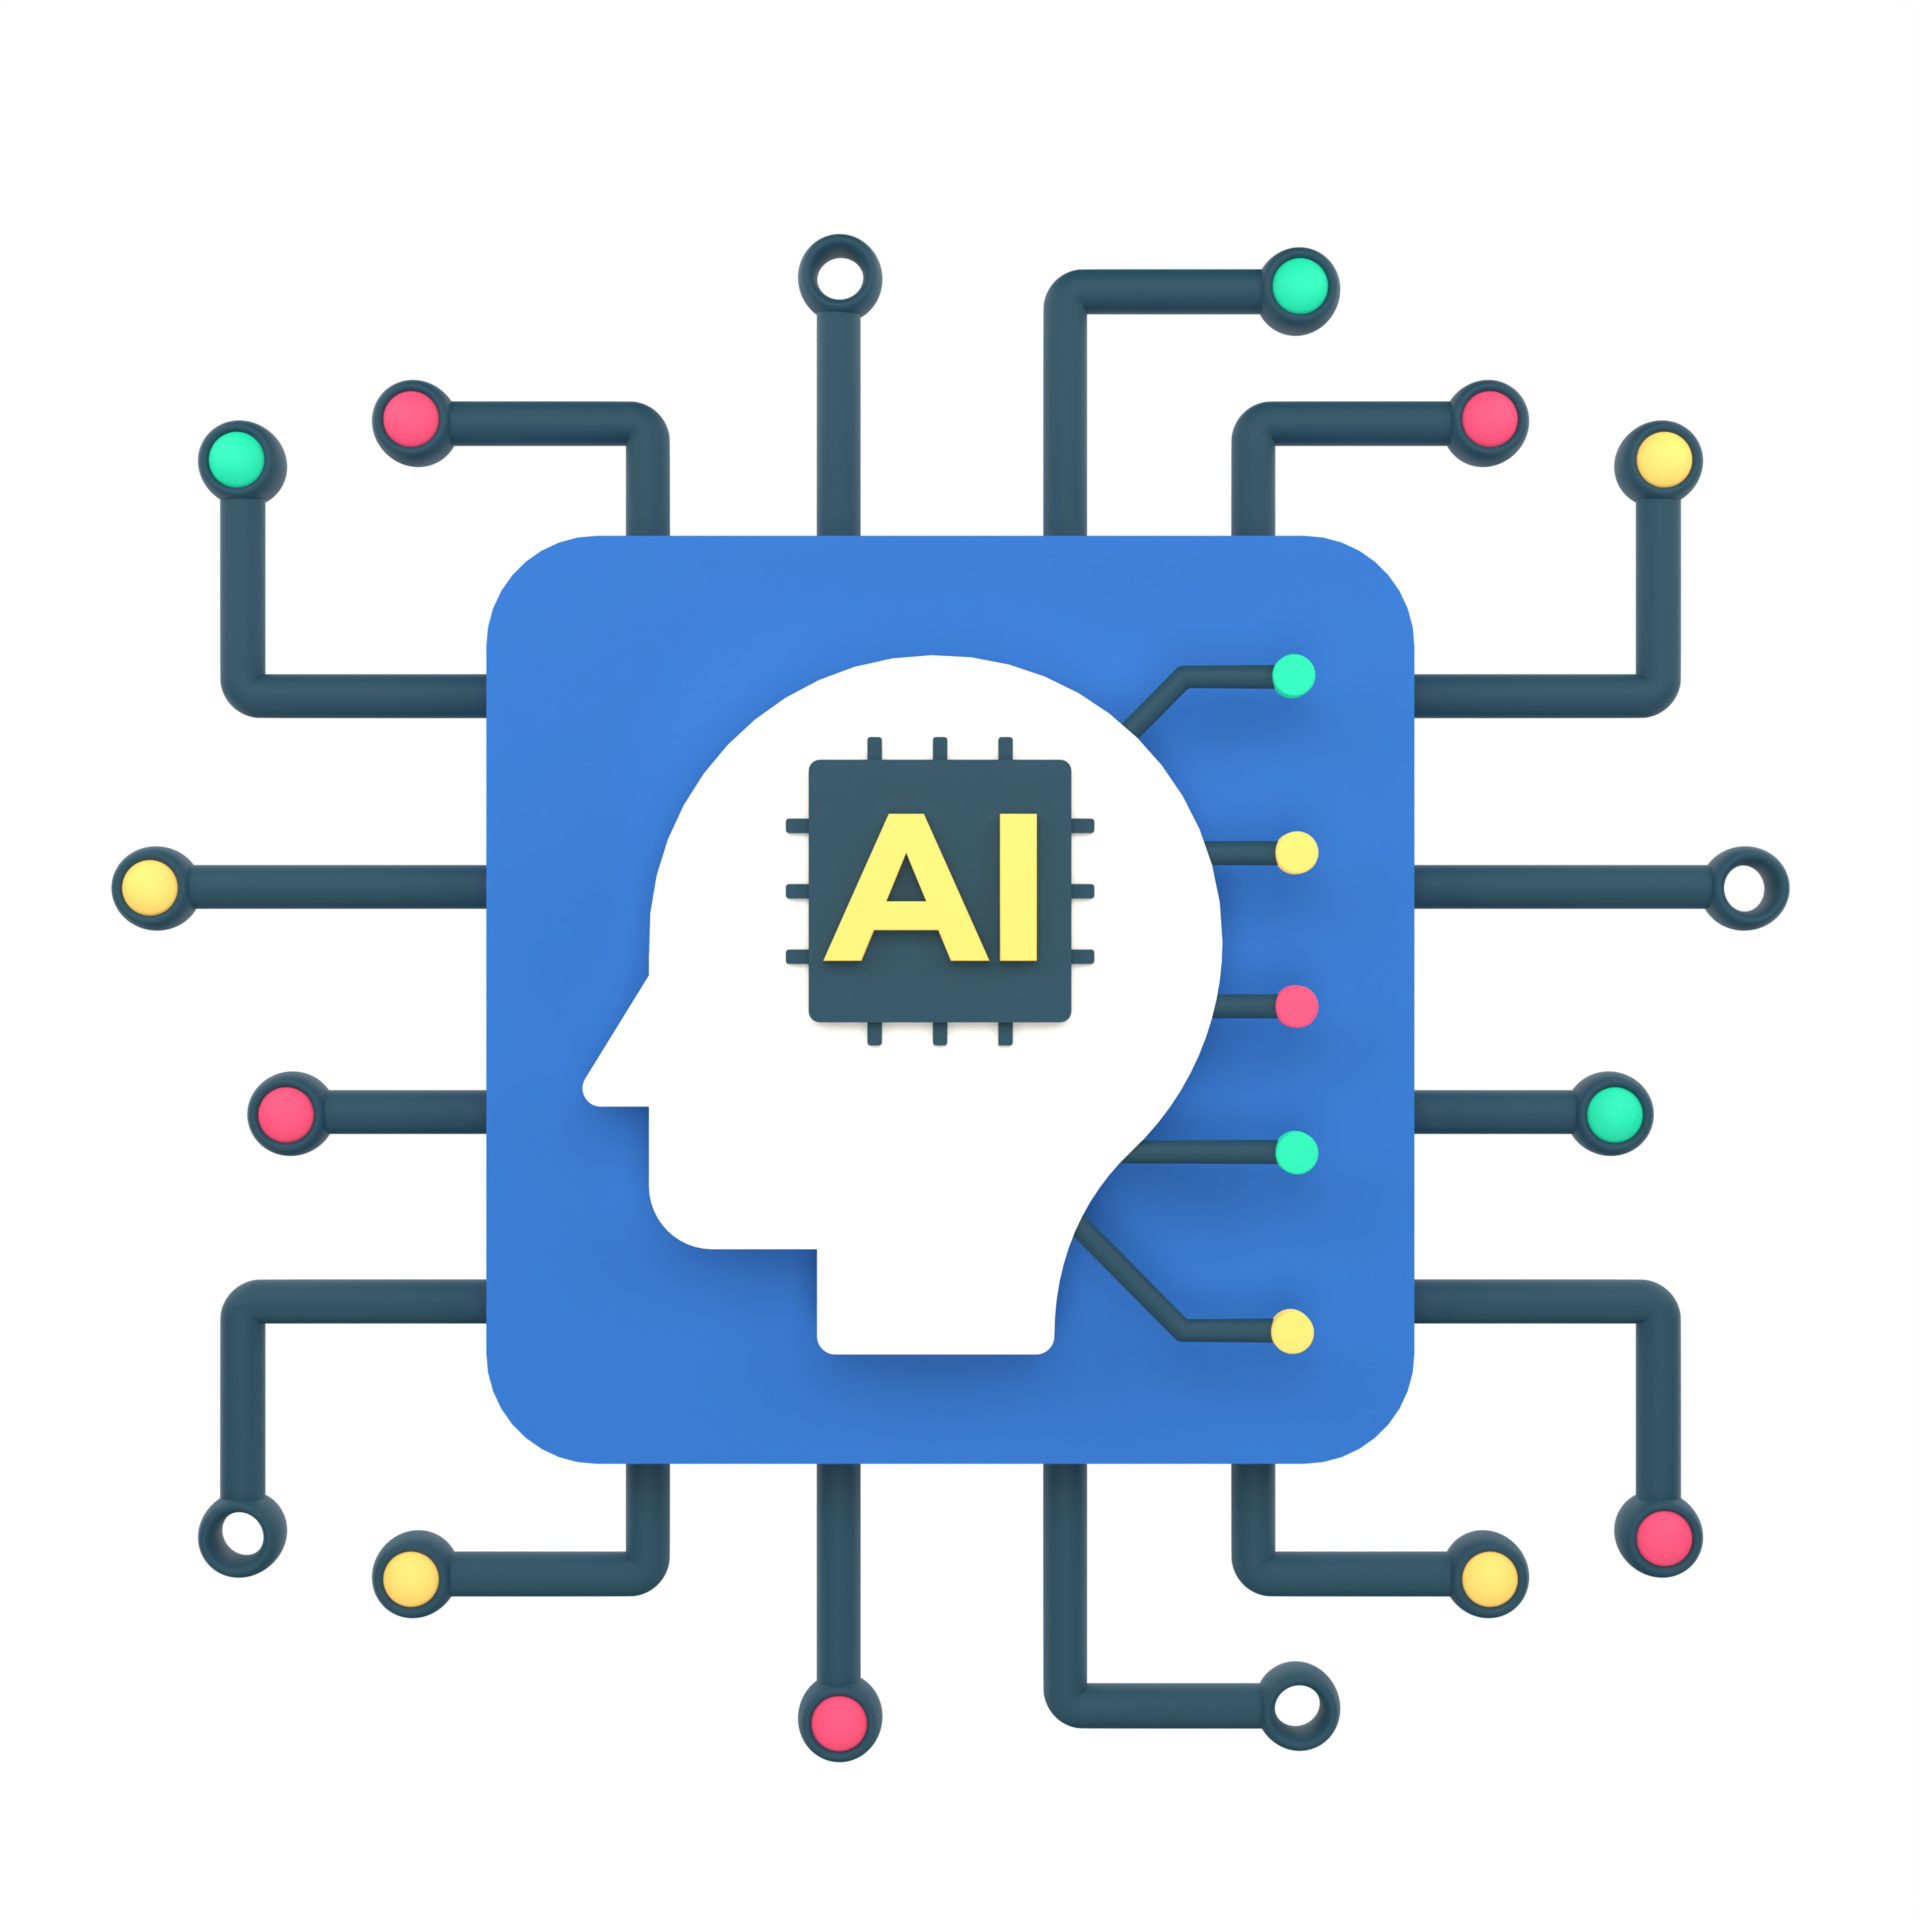 Artificial Intelligence (AI) PNG File